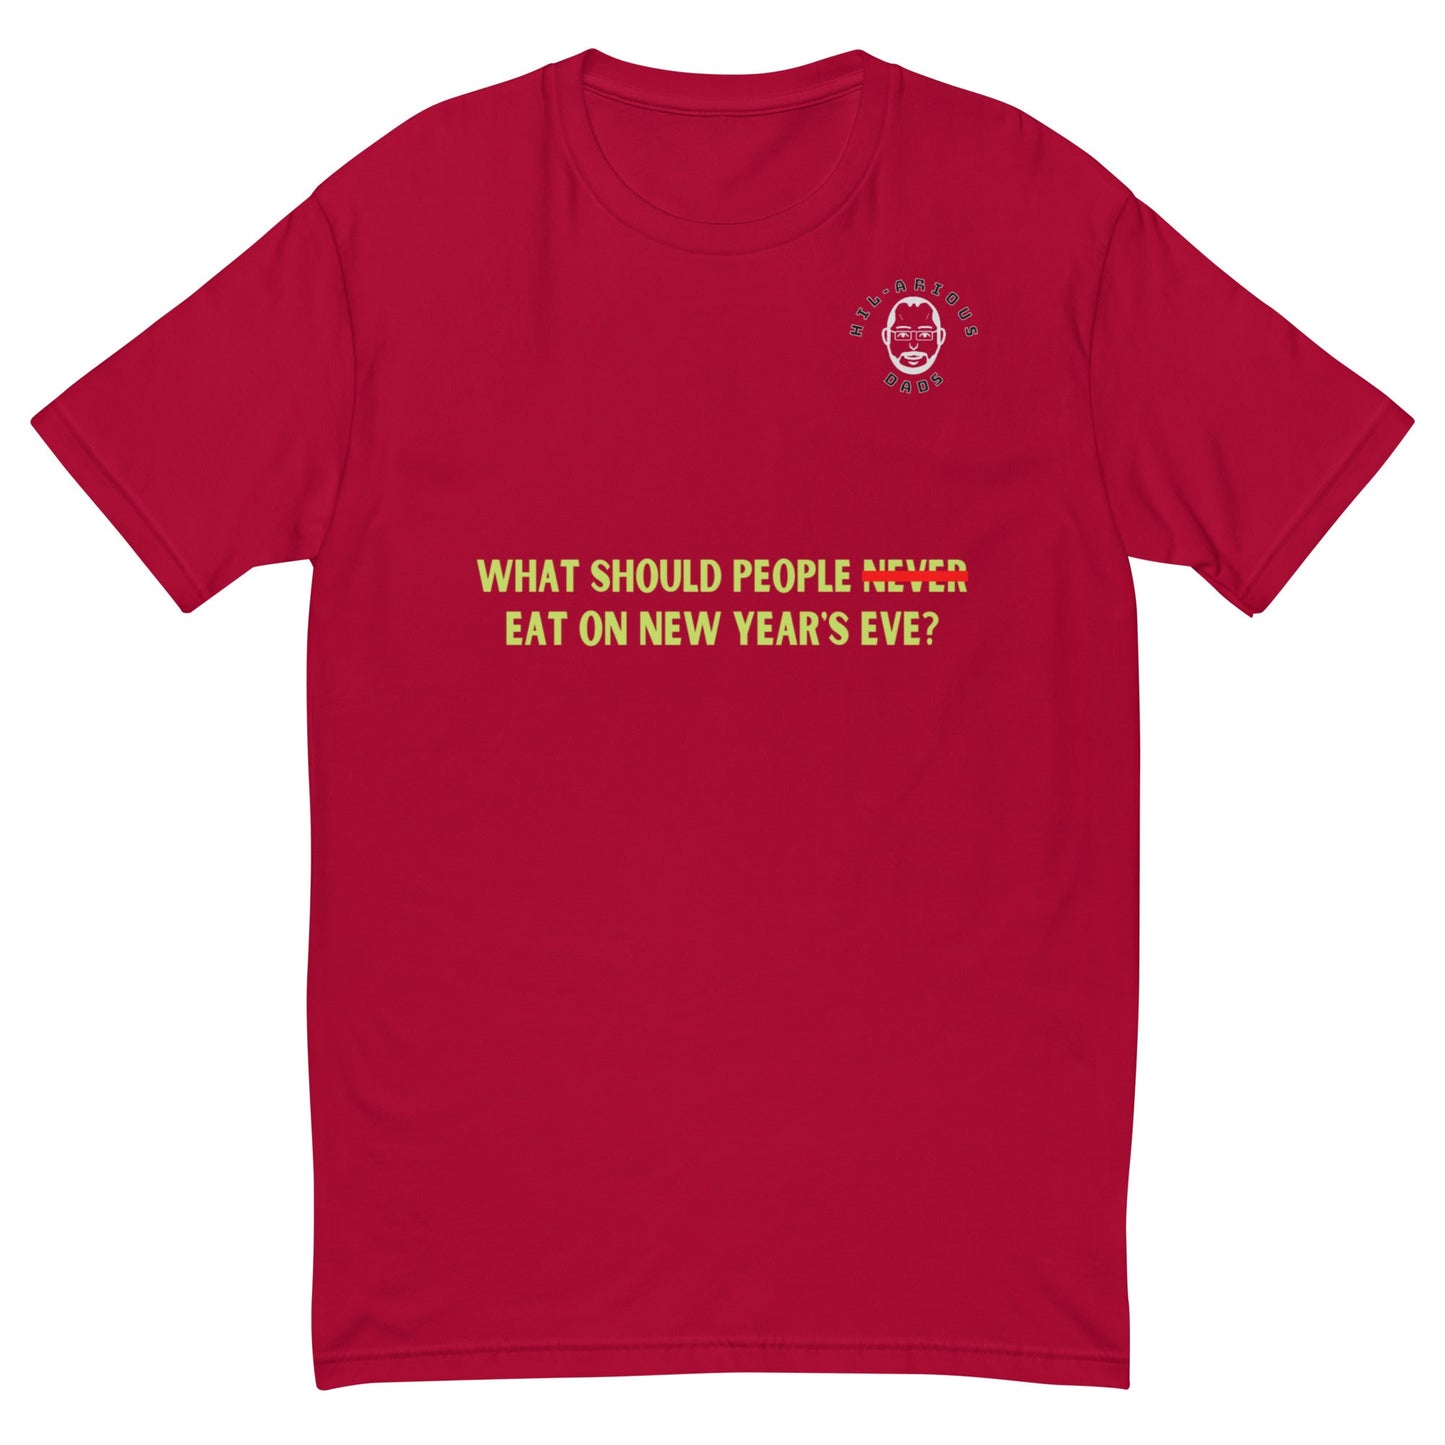 What should people NEVER eat on New Year's Eve?-T-shirt - Hil-arious Dads